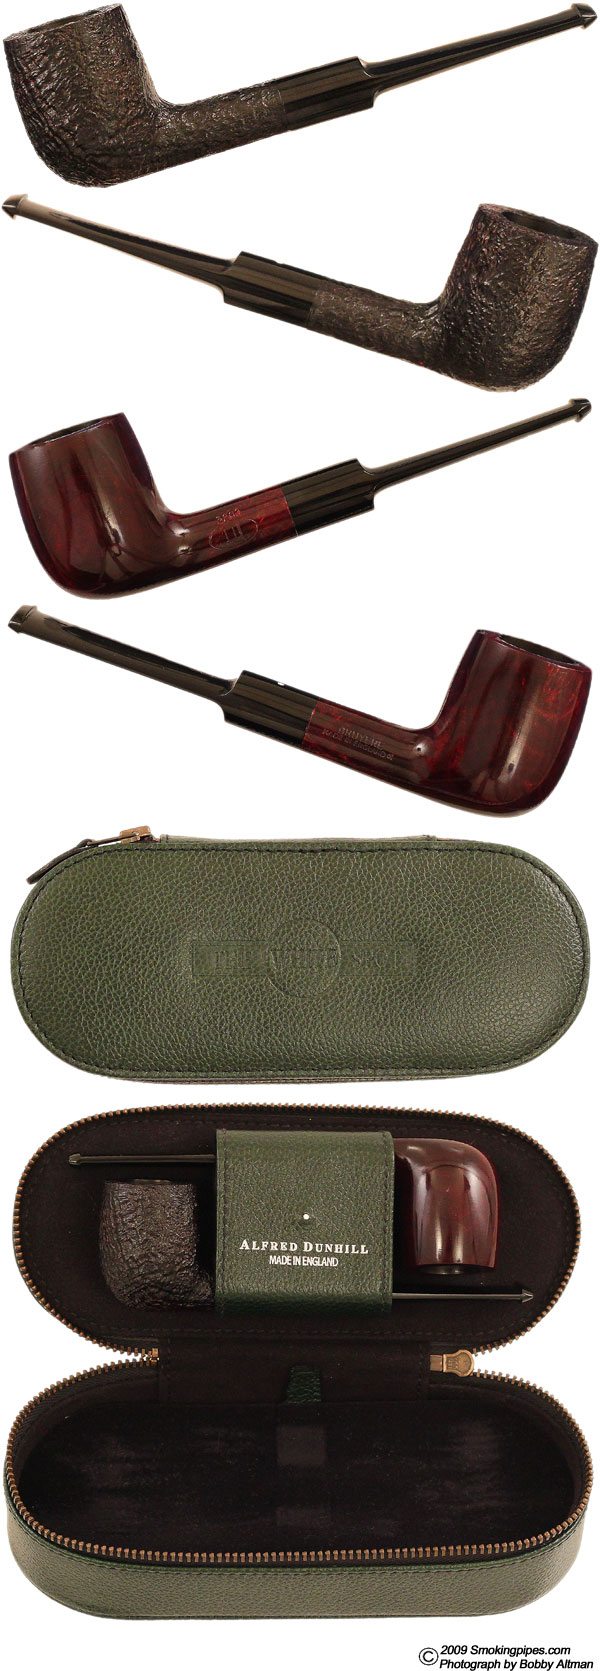 Dunhill: Bruyere & Shell Briar (3203) Two Pipe Set Tobacco Pipe